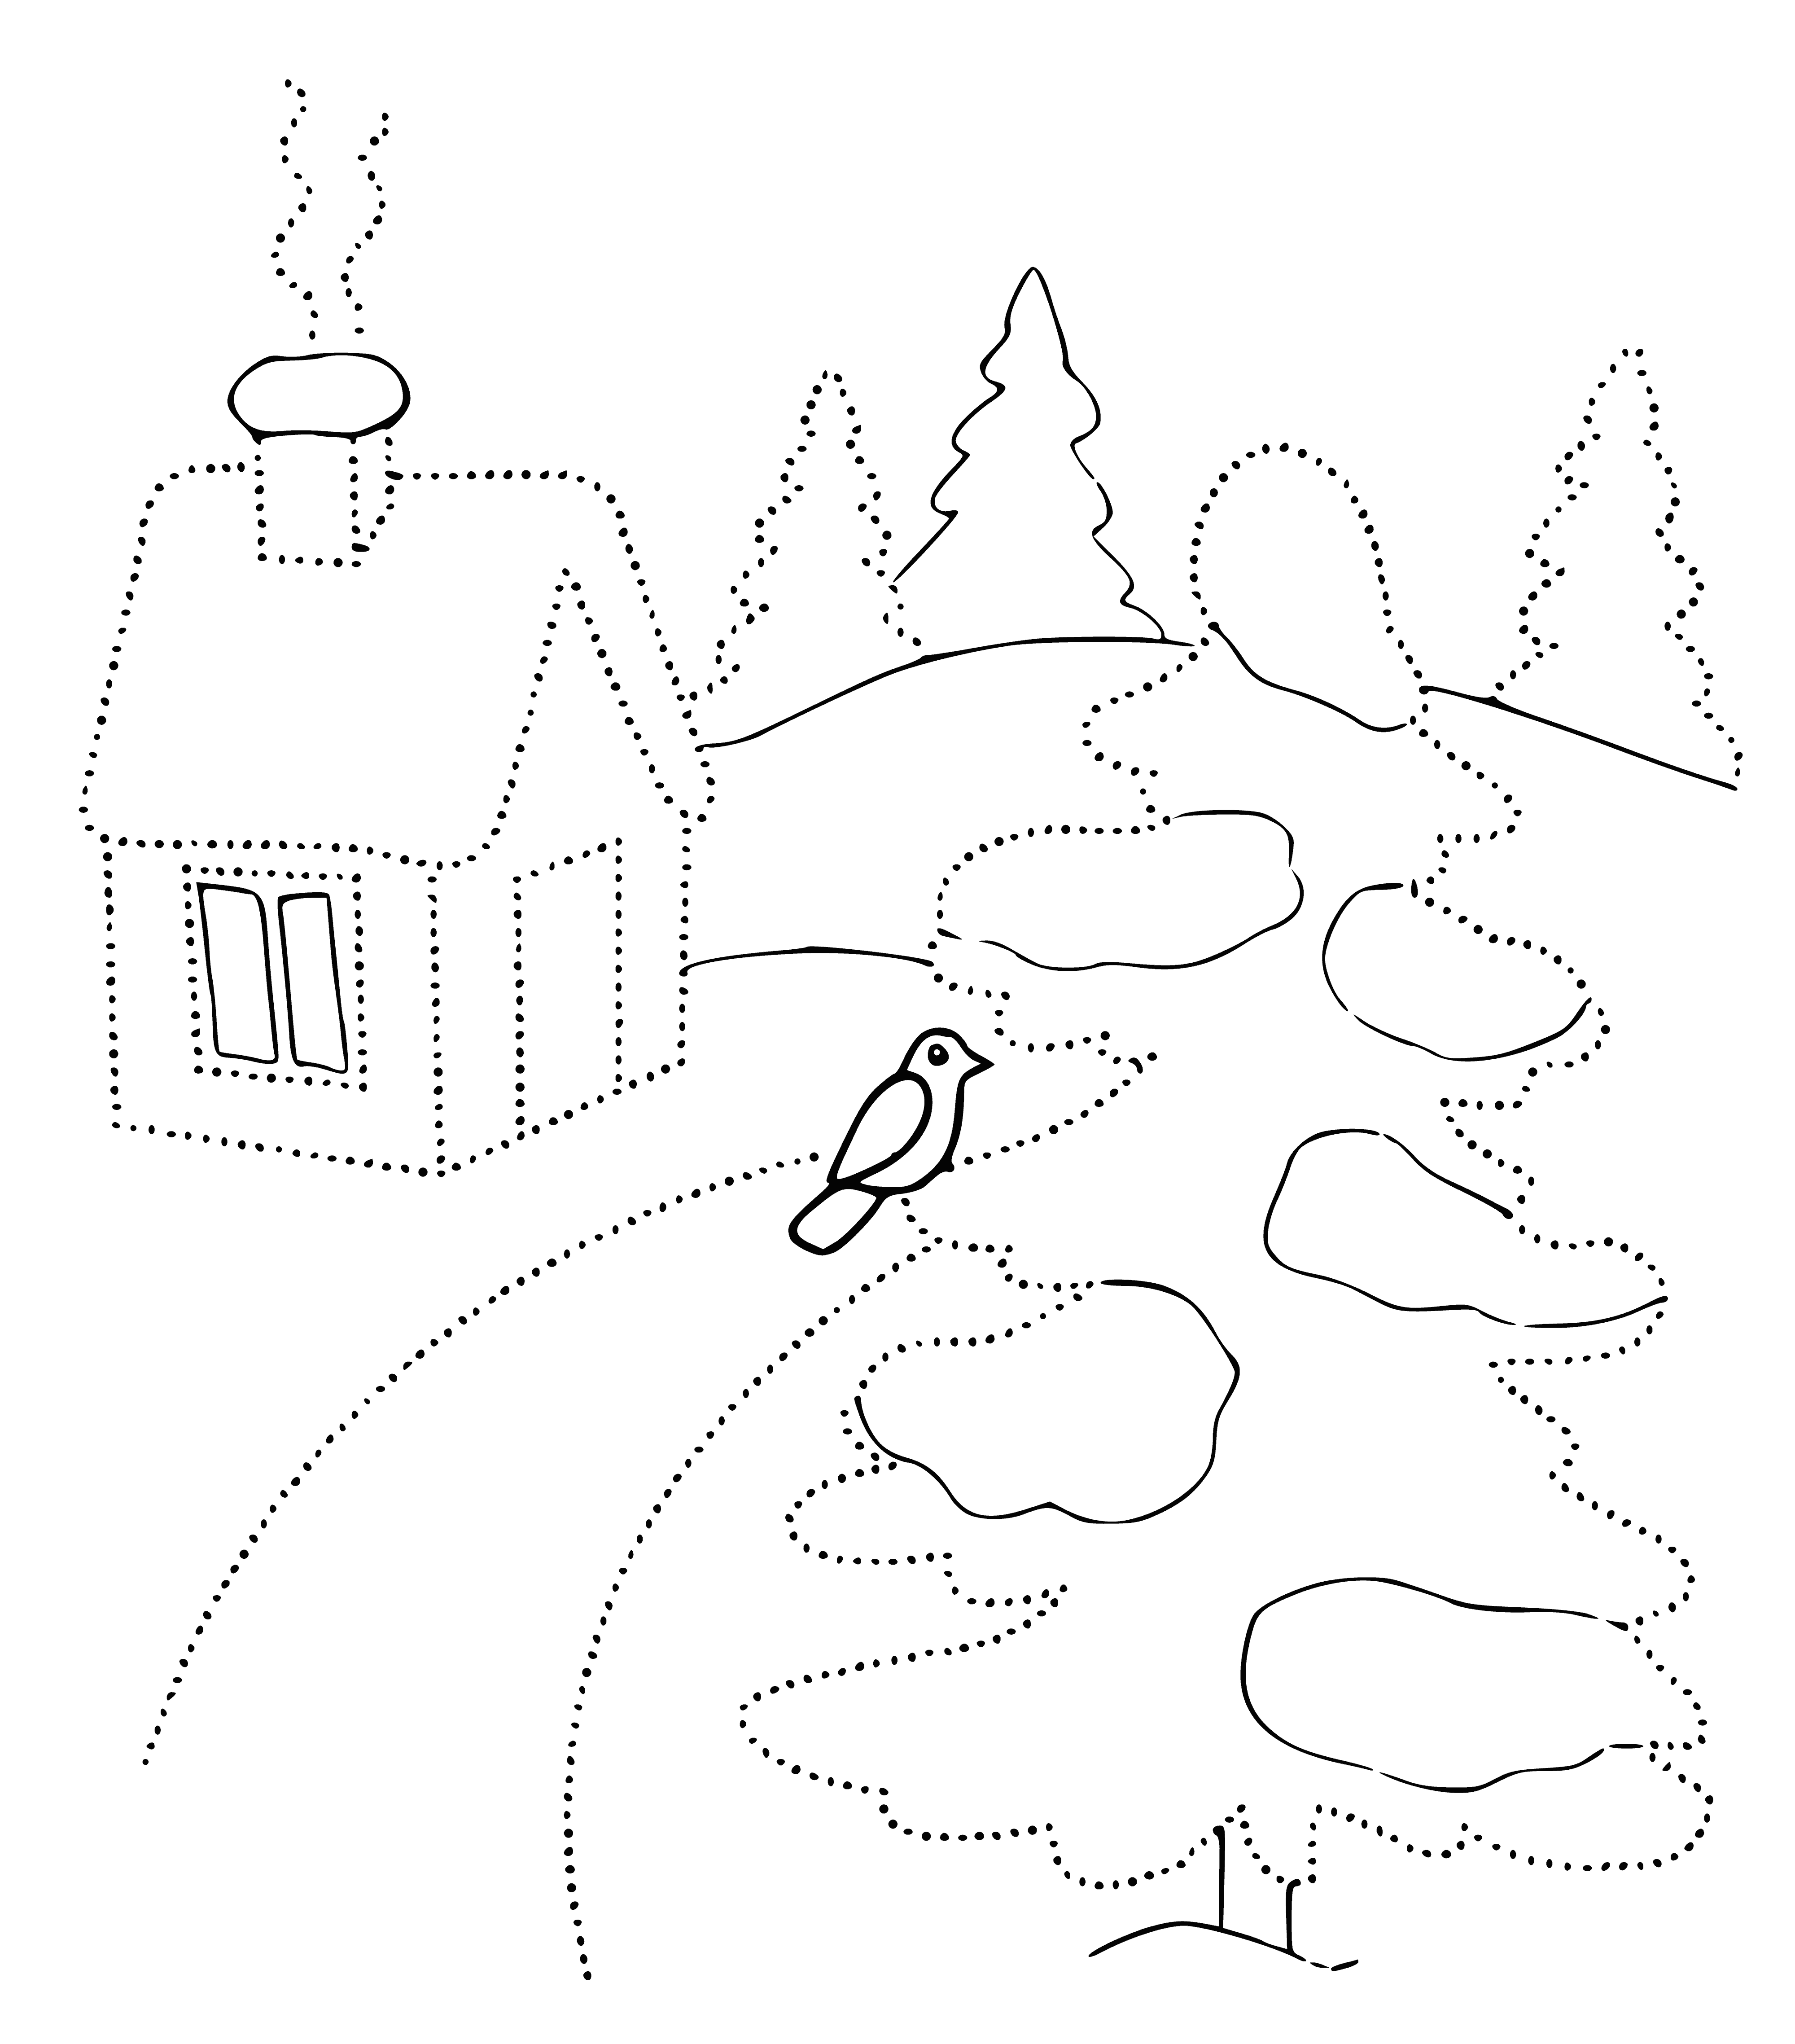 coloring page: Group of children sledding down a hill in winter gear. Snow untouched, tall tree with icicles. #WinterWonderland